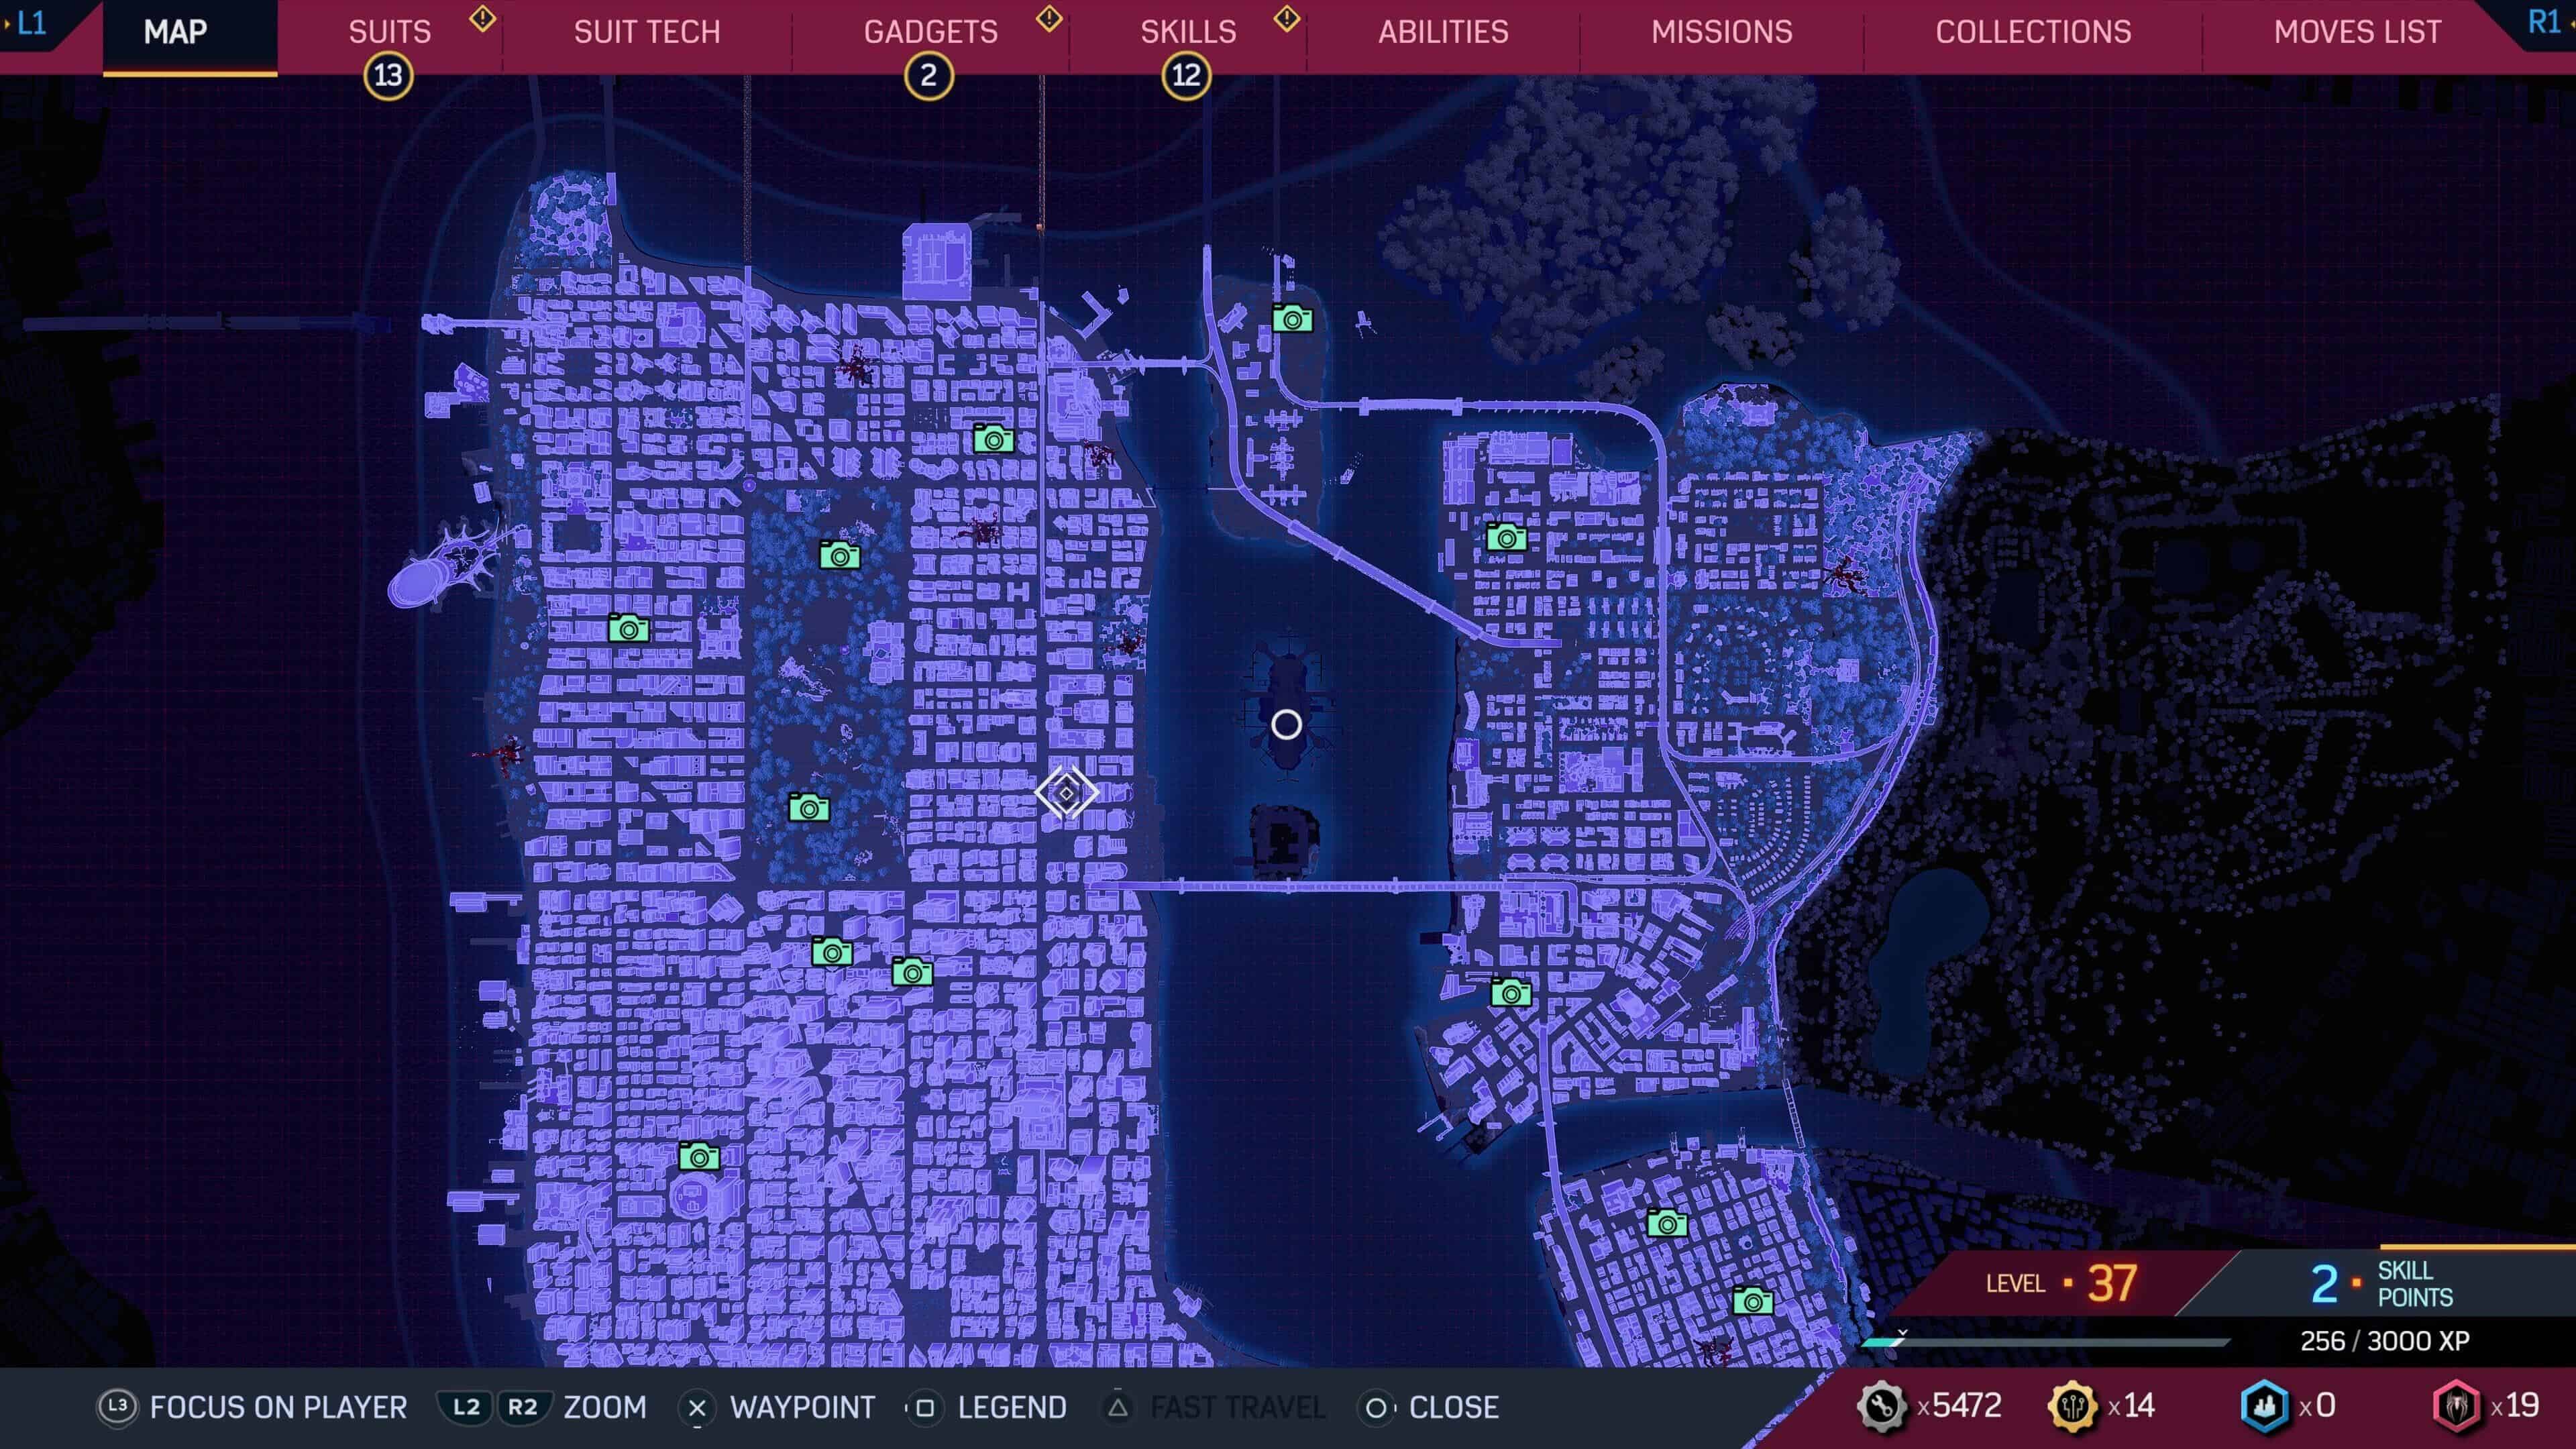 A city map featuring Spider-Man 2 photo ops, captured at night.